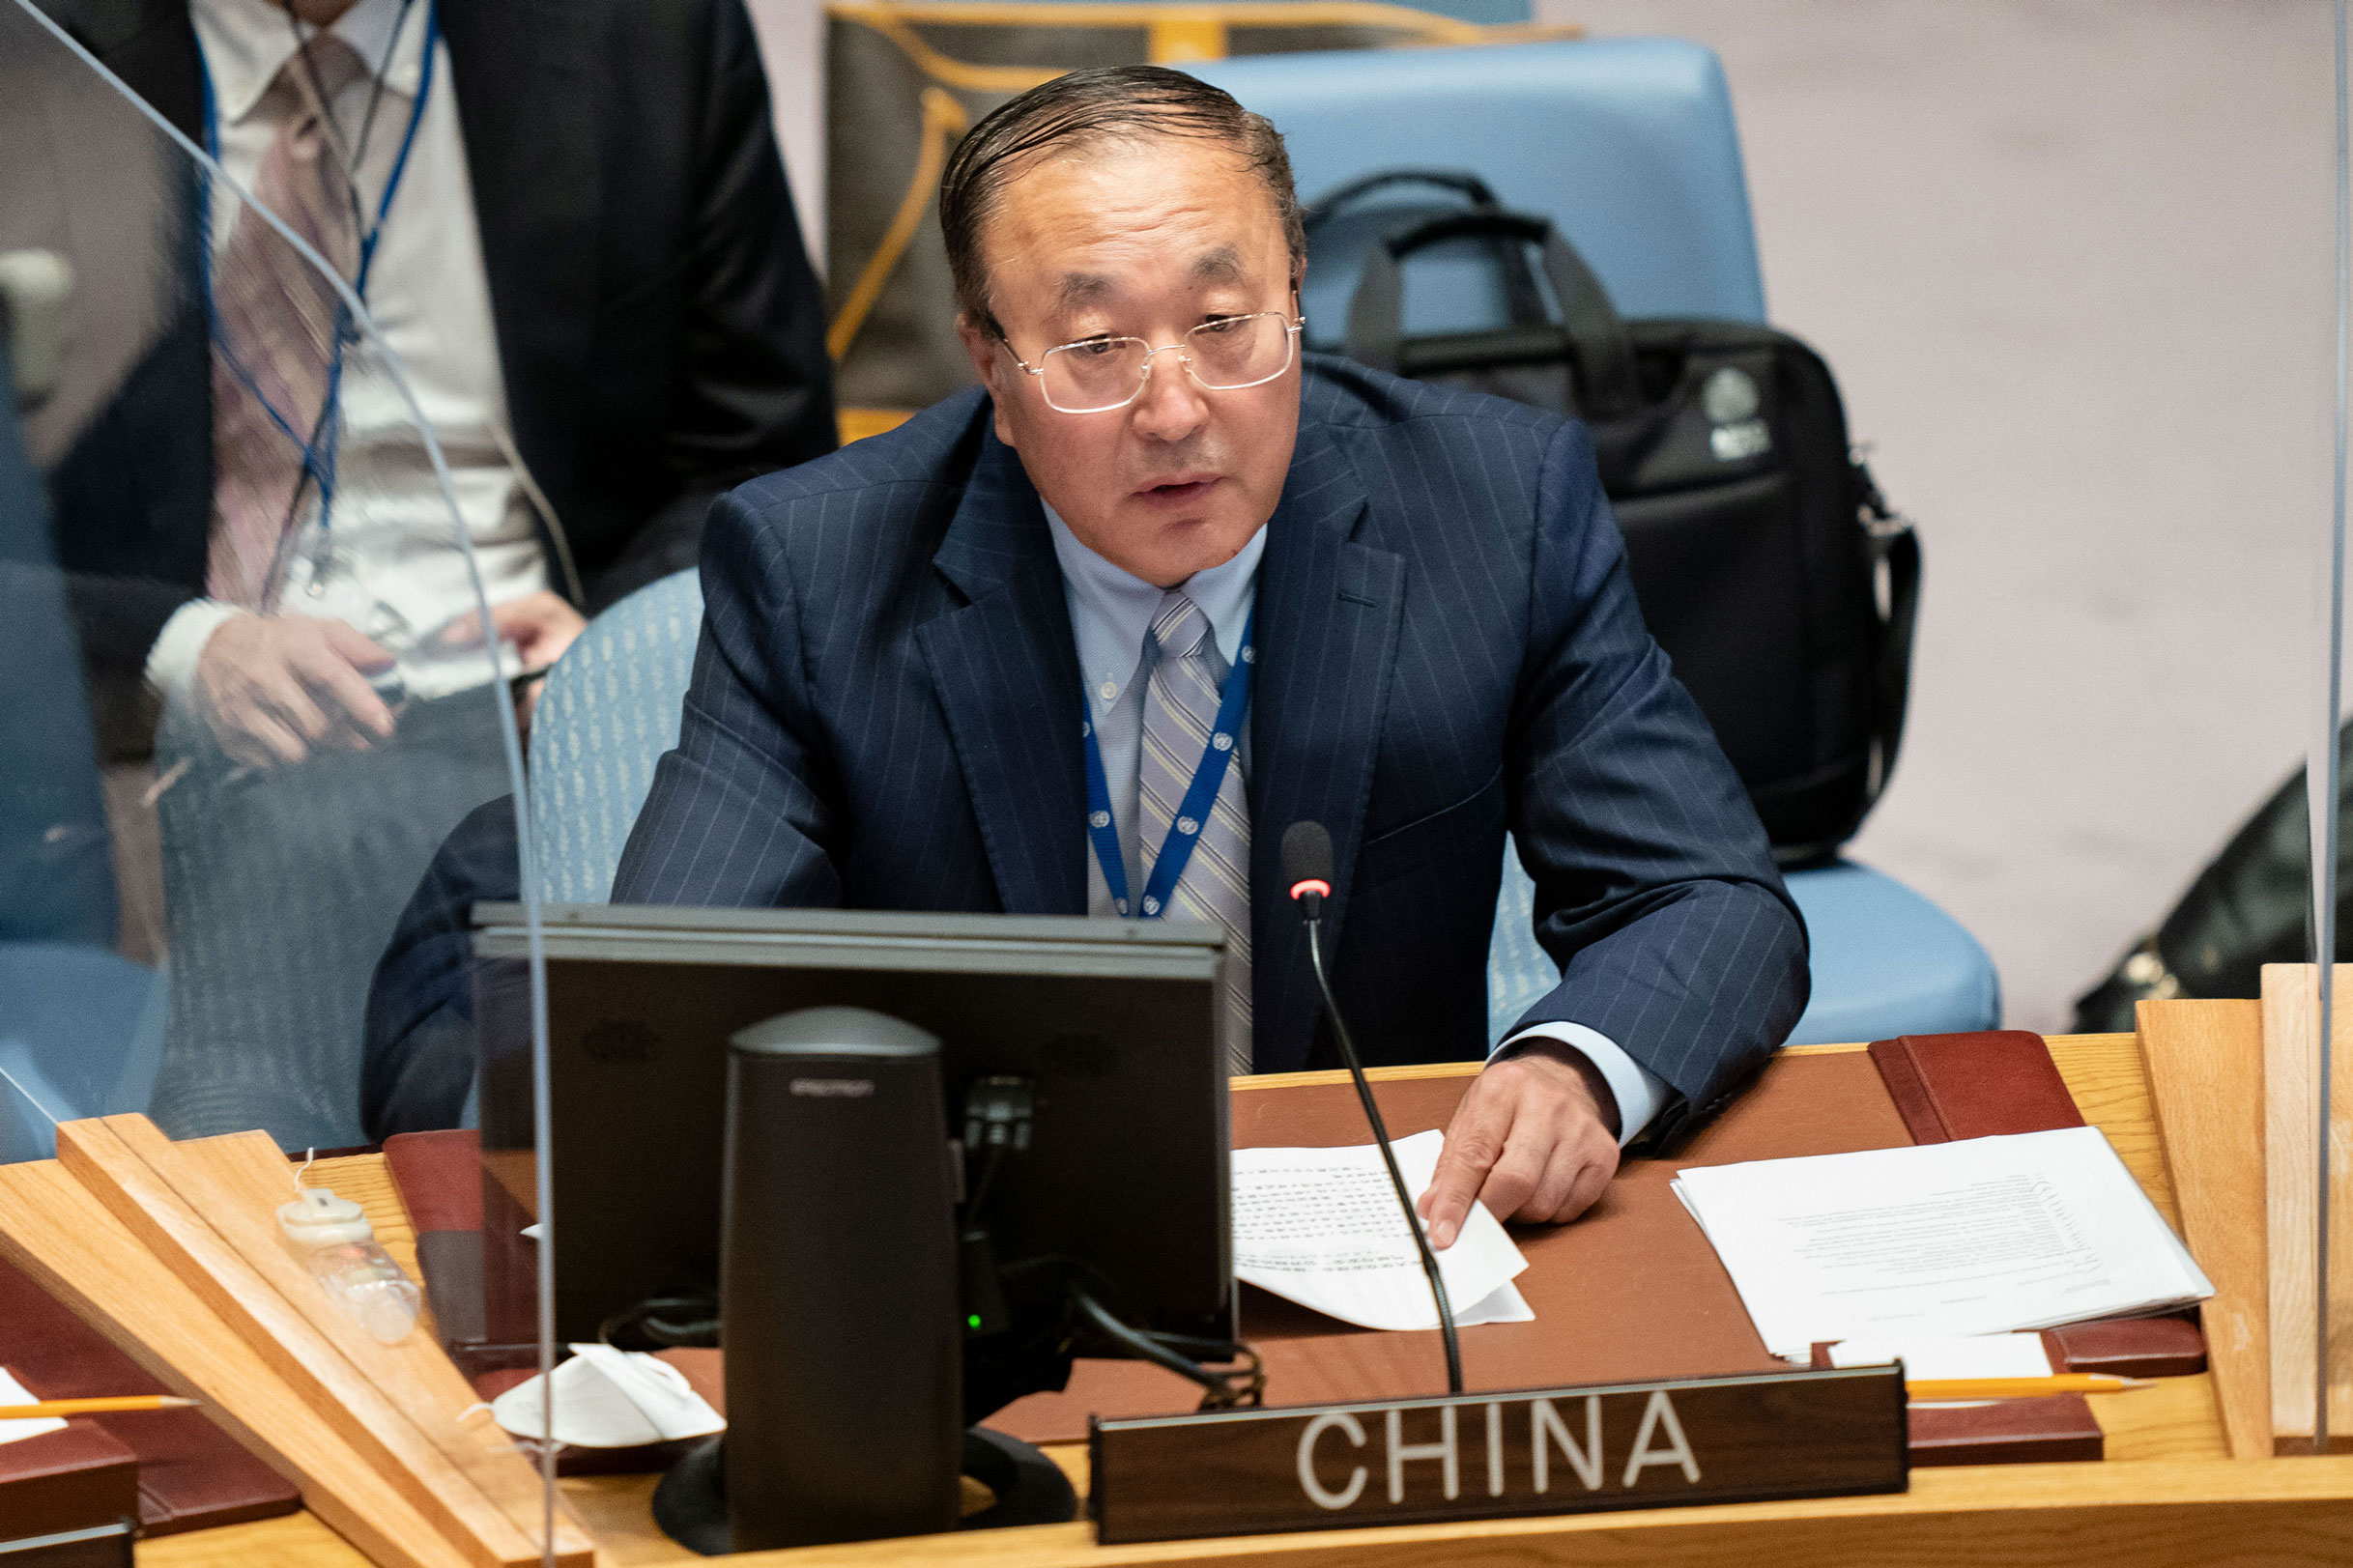 Zhang Jun, permanent representative of China to the United Nations, speaks during a meeting of the United Nations Security Council on Sept. 23, 2021.